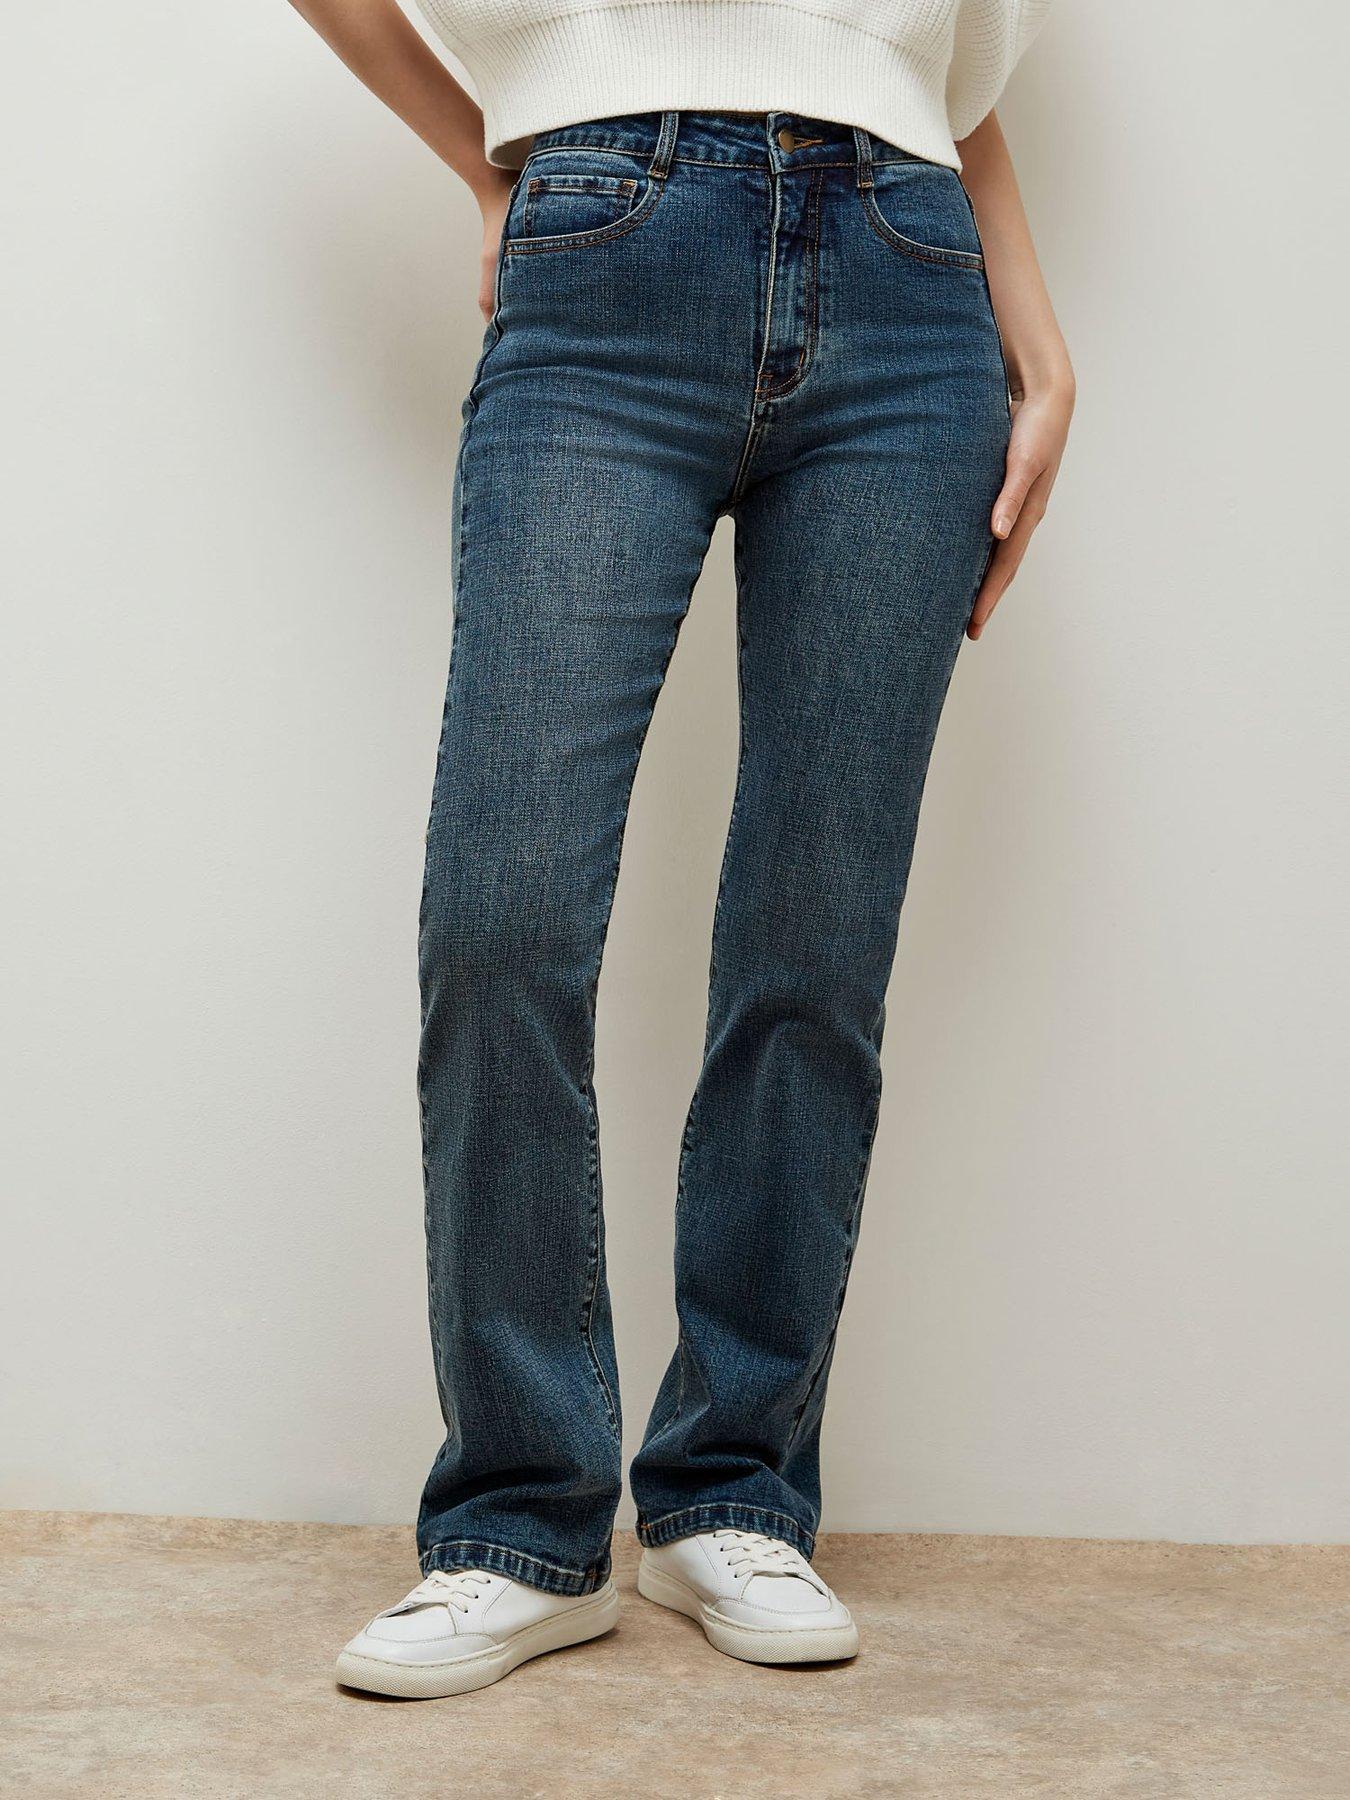 Jeans With A Slight Flare